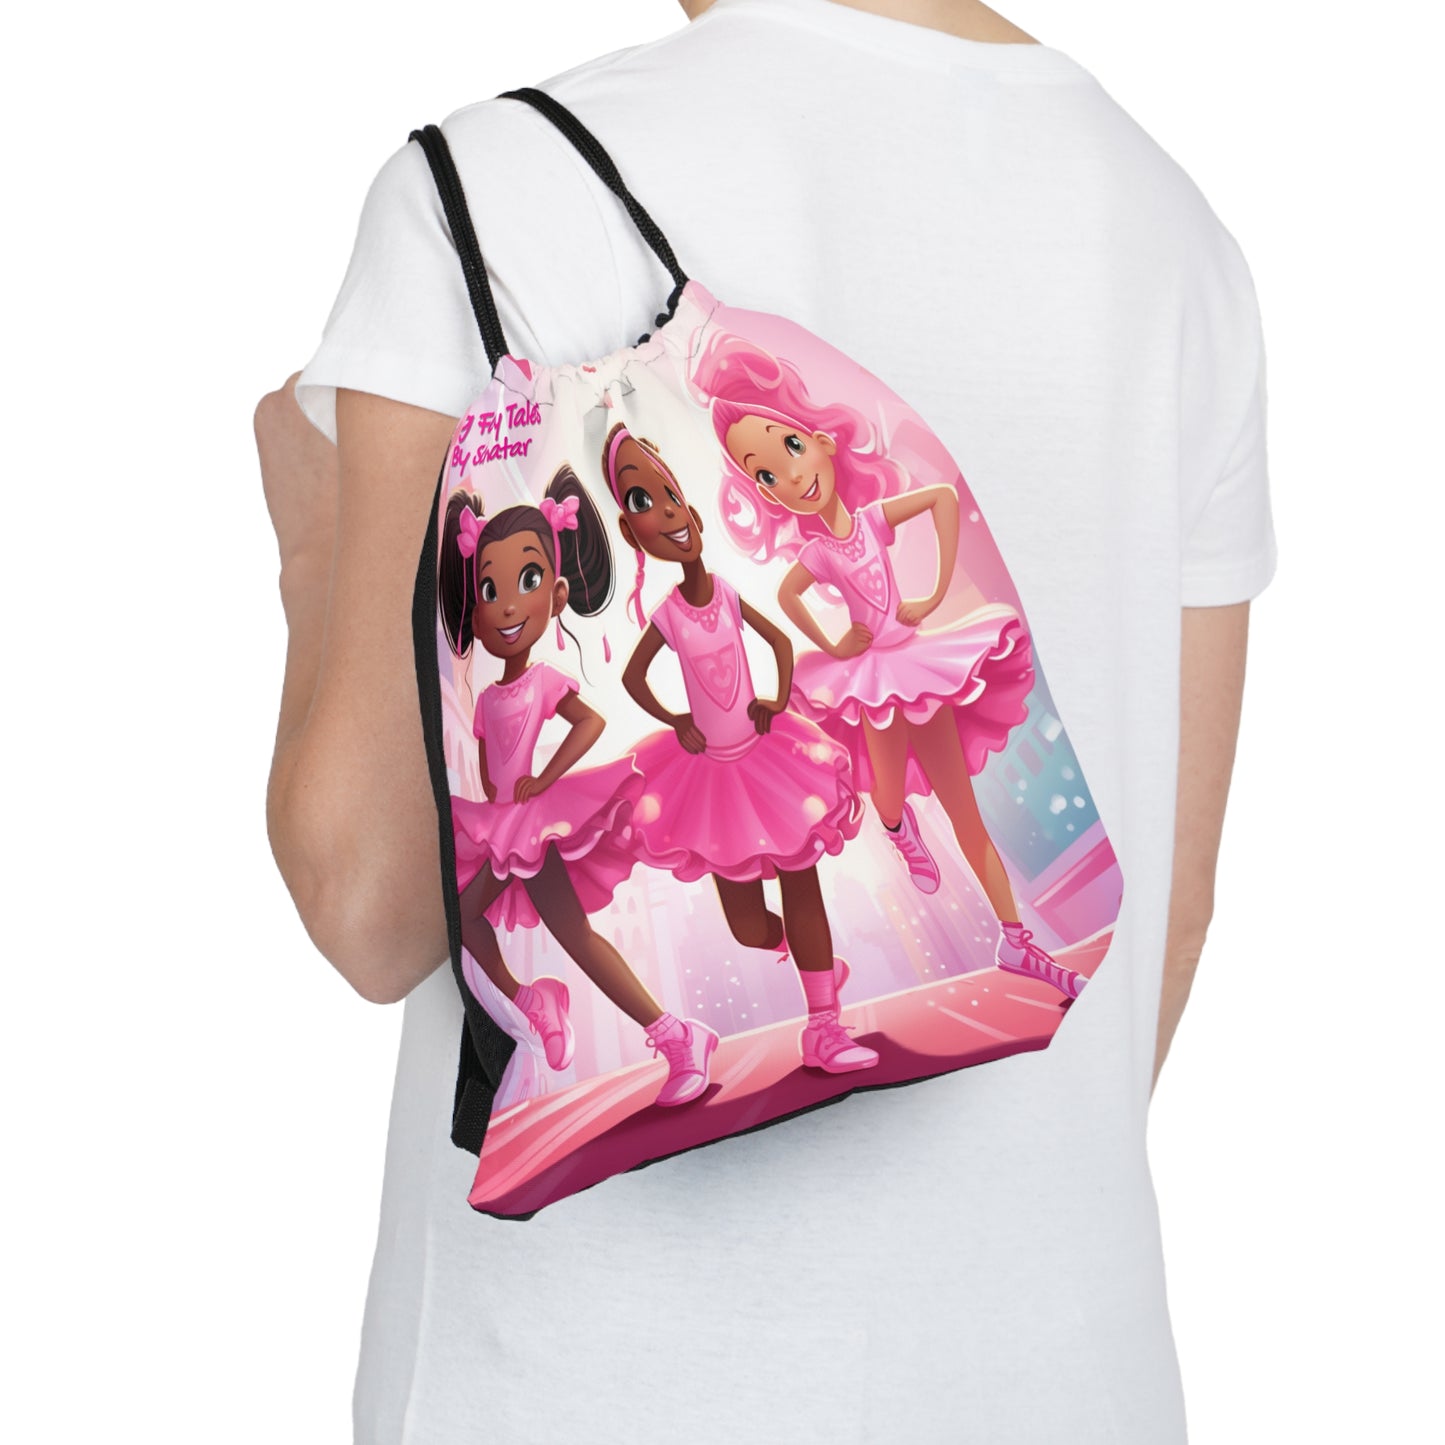 Fairy Tale Pink Tutu Tote From Big Fairy Tales By Schatar